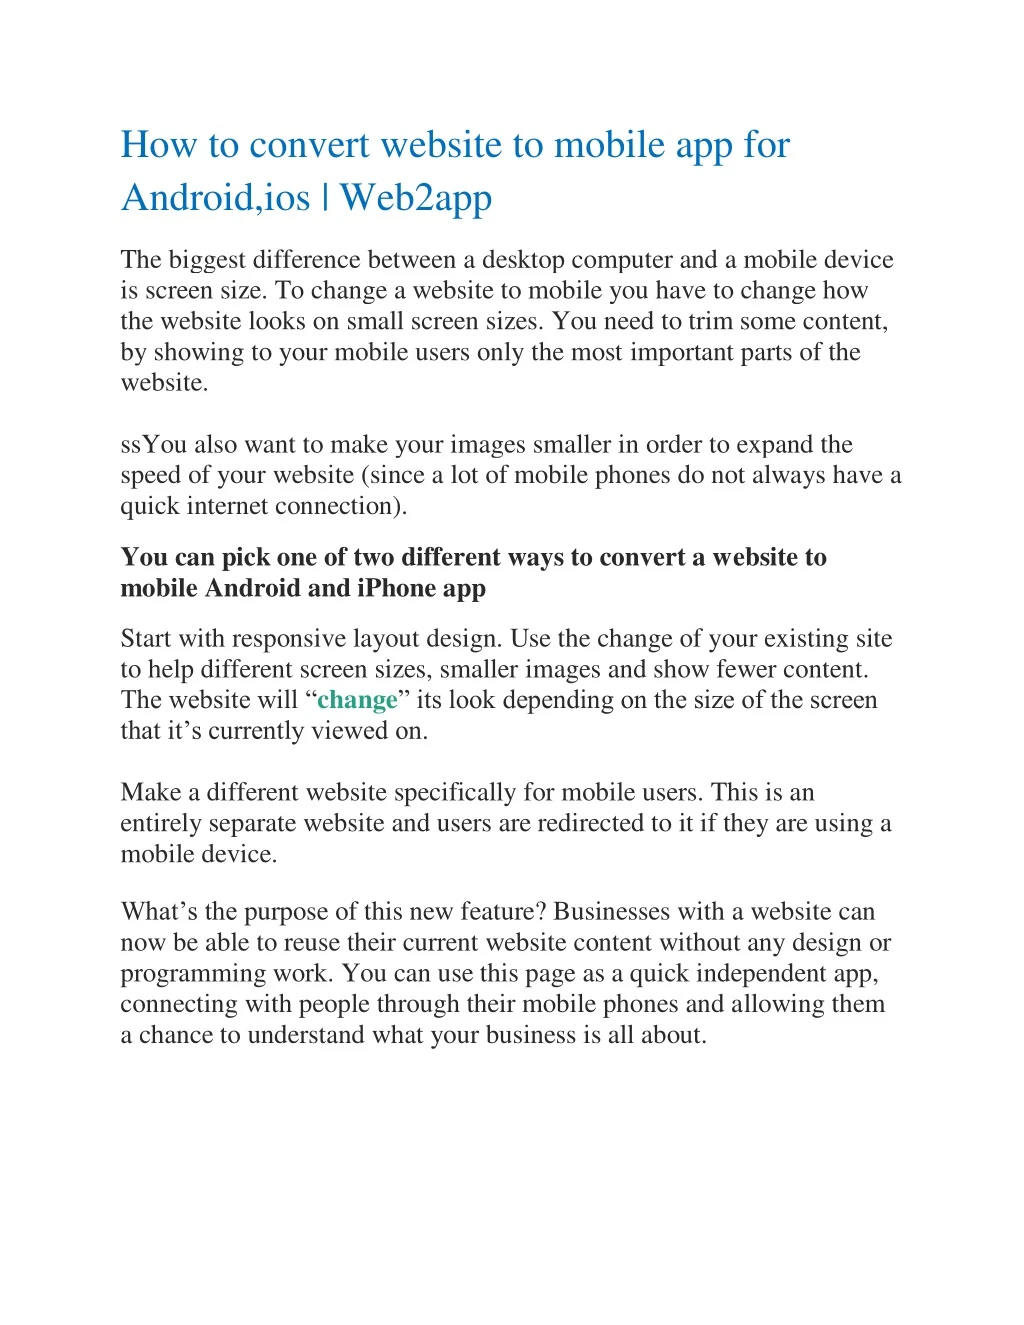 how to convert website to mobile app for android